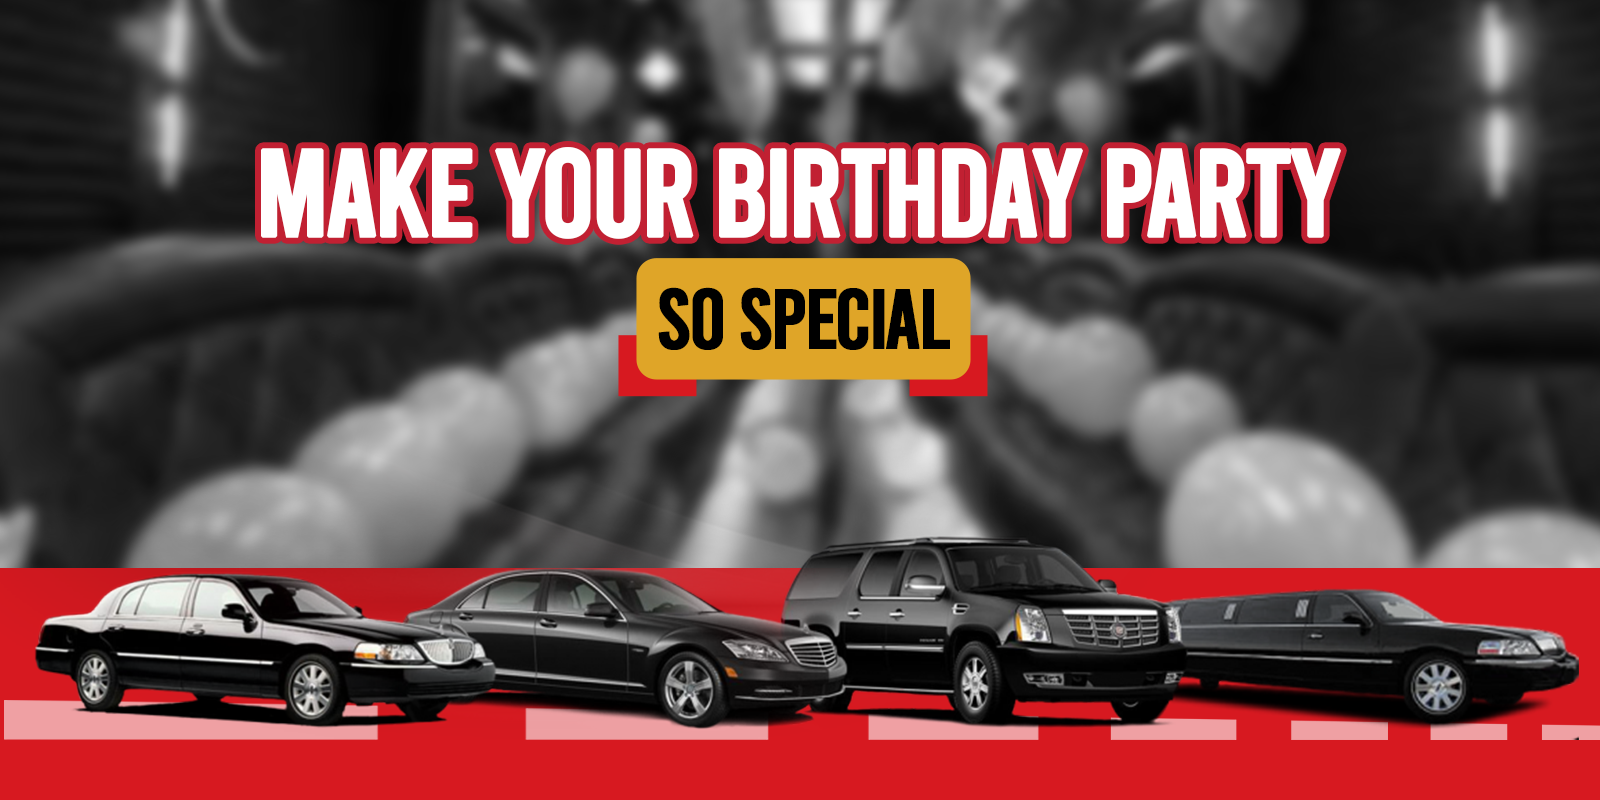 Best Birthday Party Bus Rentals In Town – JMS VIP LIMO